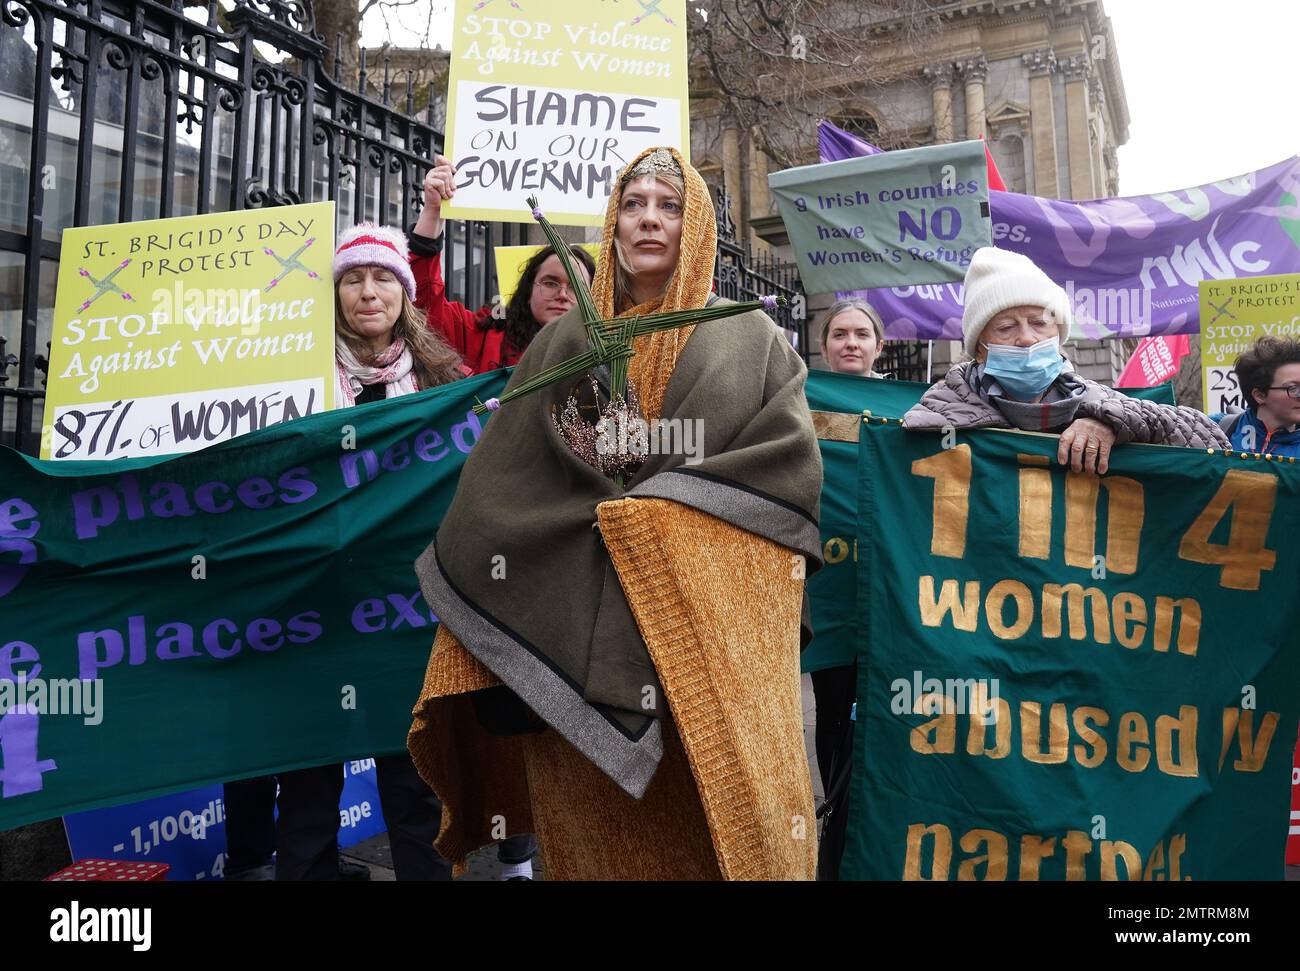 Lisamarie Johnson (centre), holding a traditional St. Brigid's Cross made from rushes, attends a St Brigid's Day rally outside Leinster House, Dublin, calling on the Government to take action in addressing violence against women in Ireland. The rally was held to coincide with St Brigid’s Day, with speakers asking that women be protected in the spirit of the Celtic goddess and Christian saint Brigid, who is associated with healing. Picture date: Wednesday February 1, 2023. Stock Photo